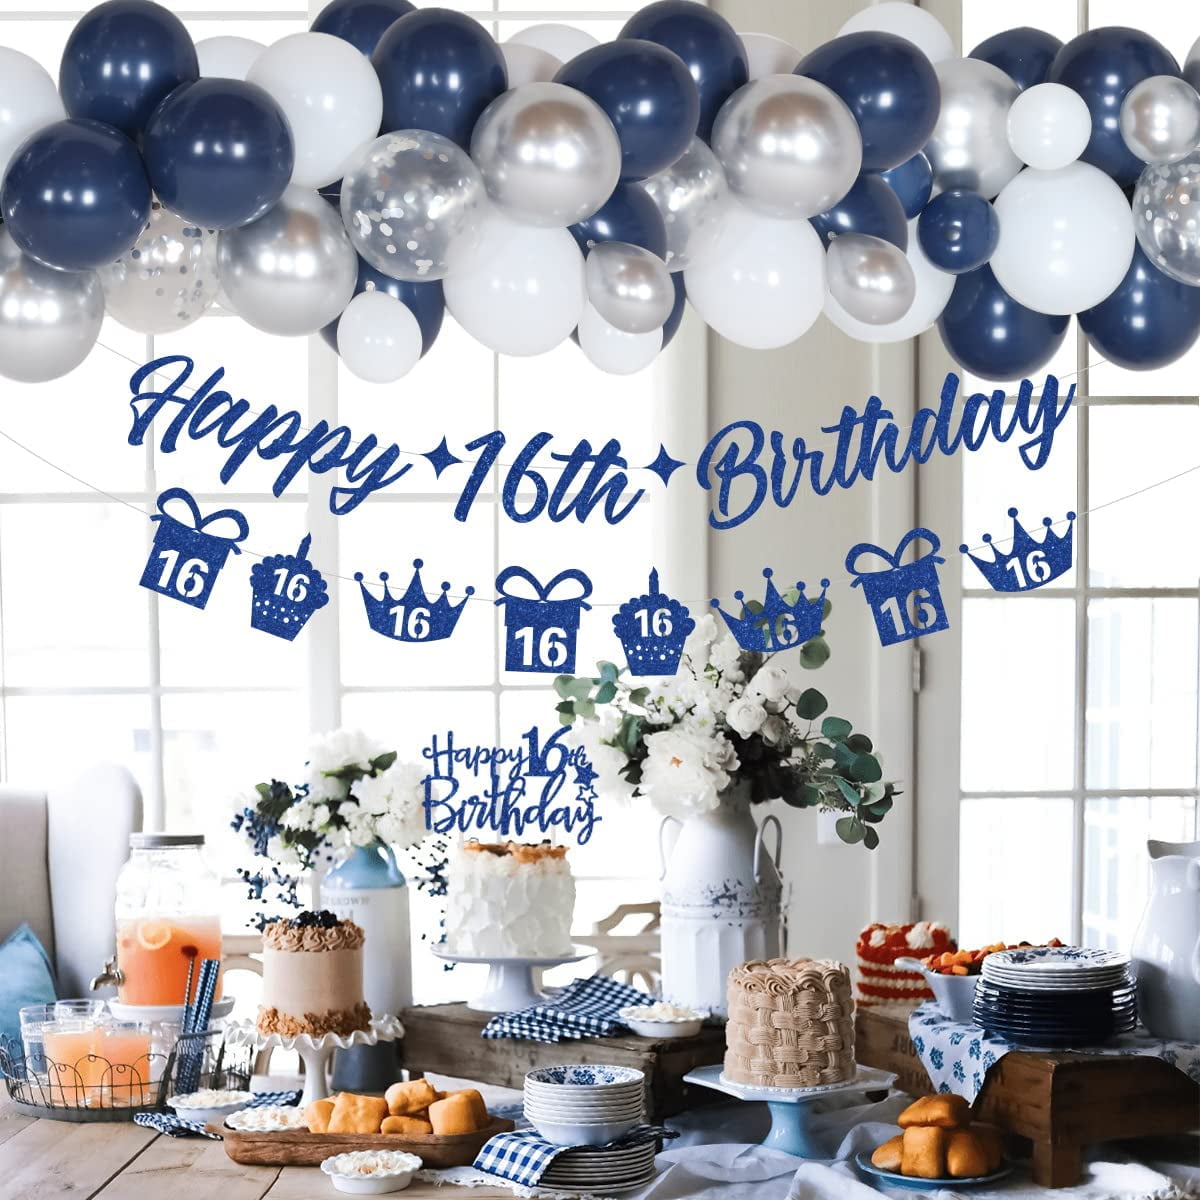 MAGJUCHE Blue It's My 12nd Birthday sash, Boy or Girl 12 Years Birthday  Gifts Party Supplies, Royal Blue Party Decorations